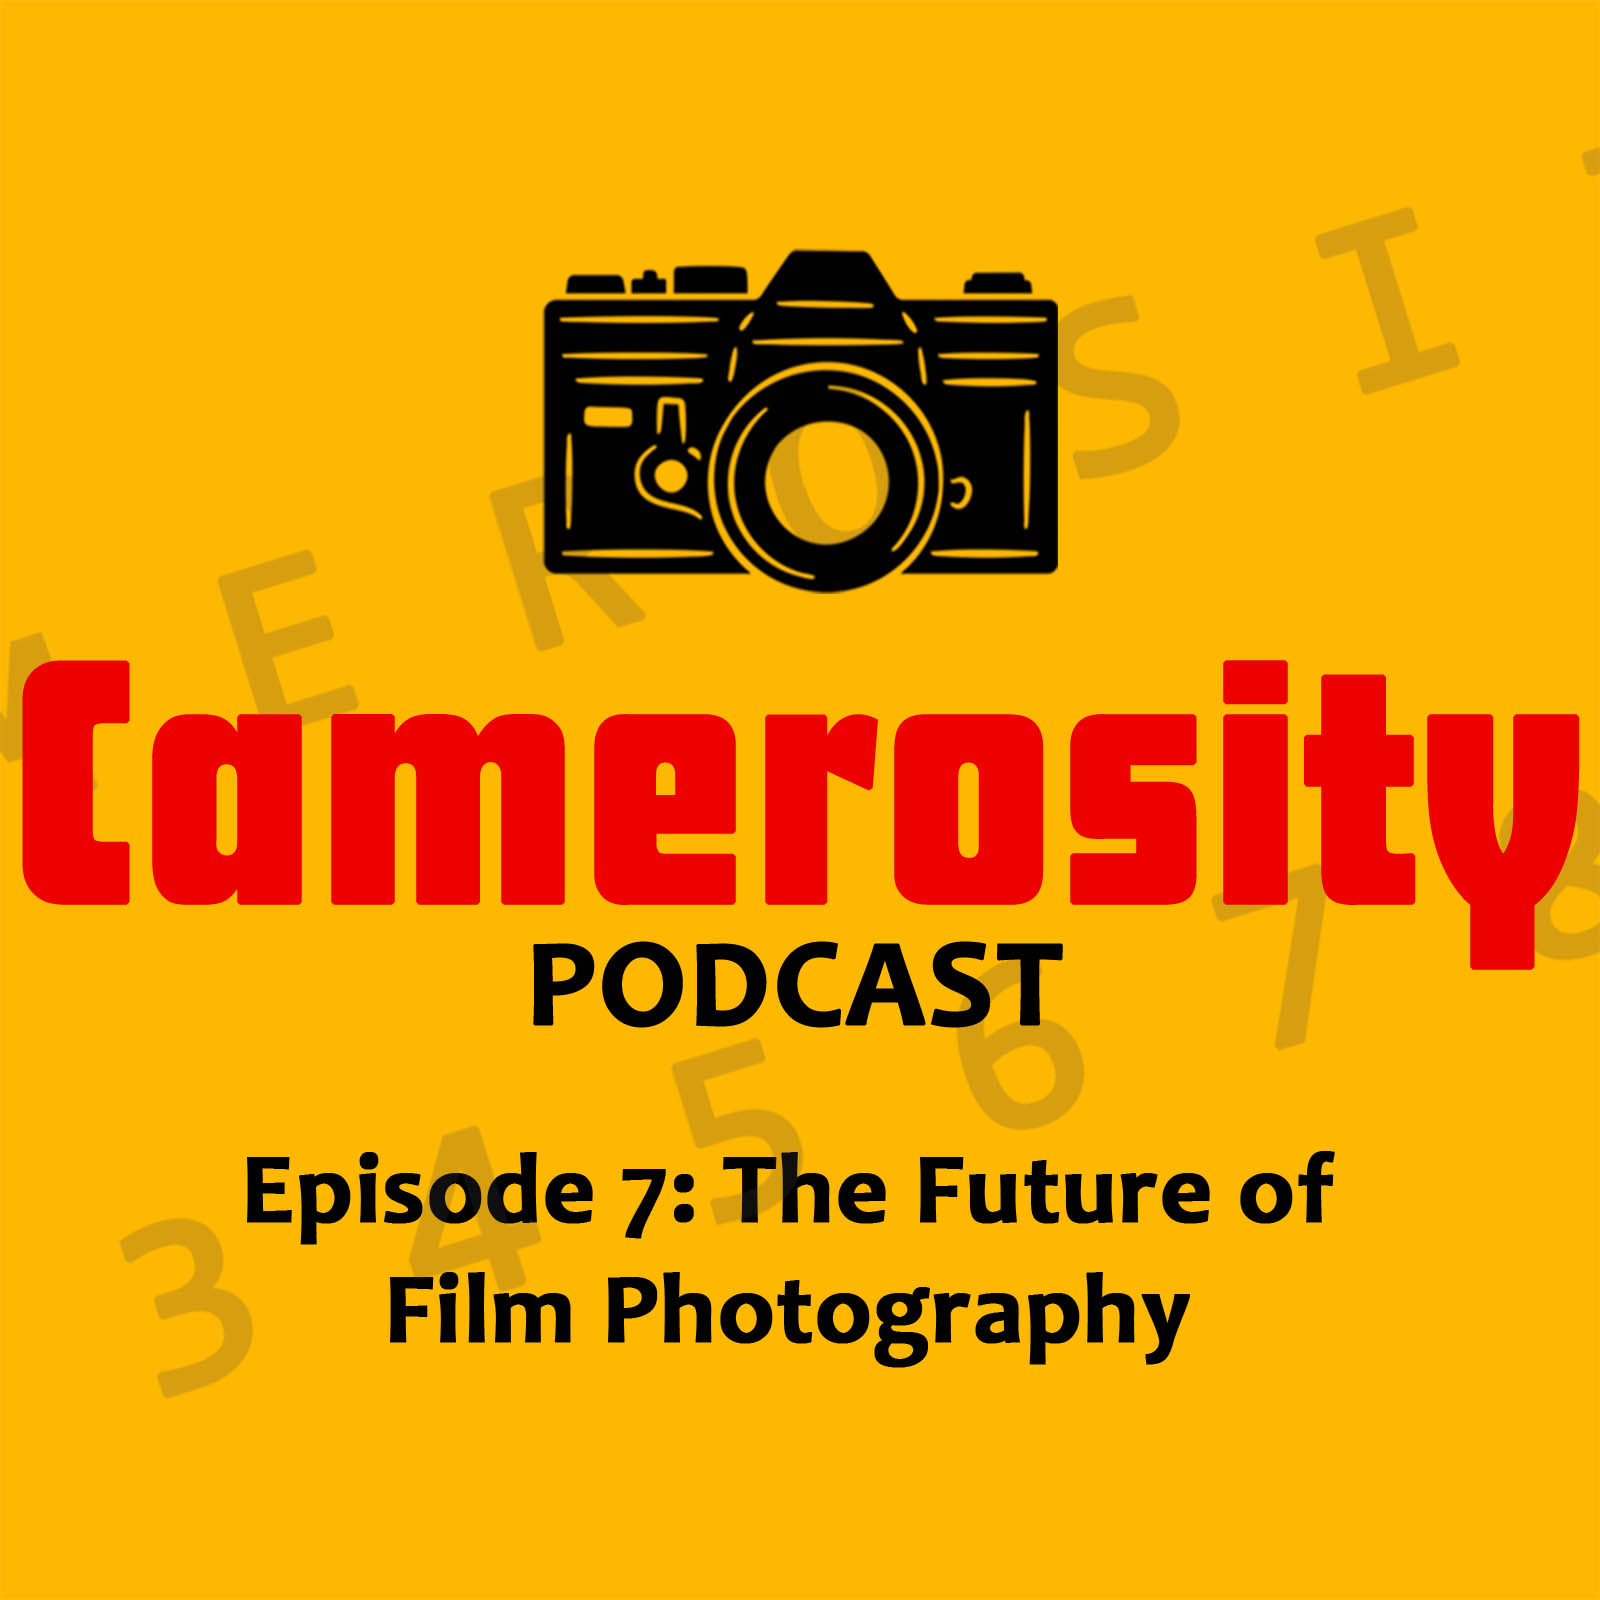 Episode 7: The Future of Film Photography